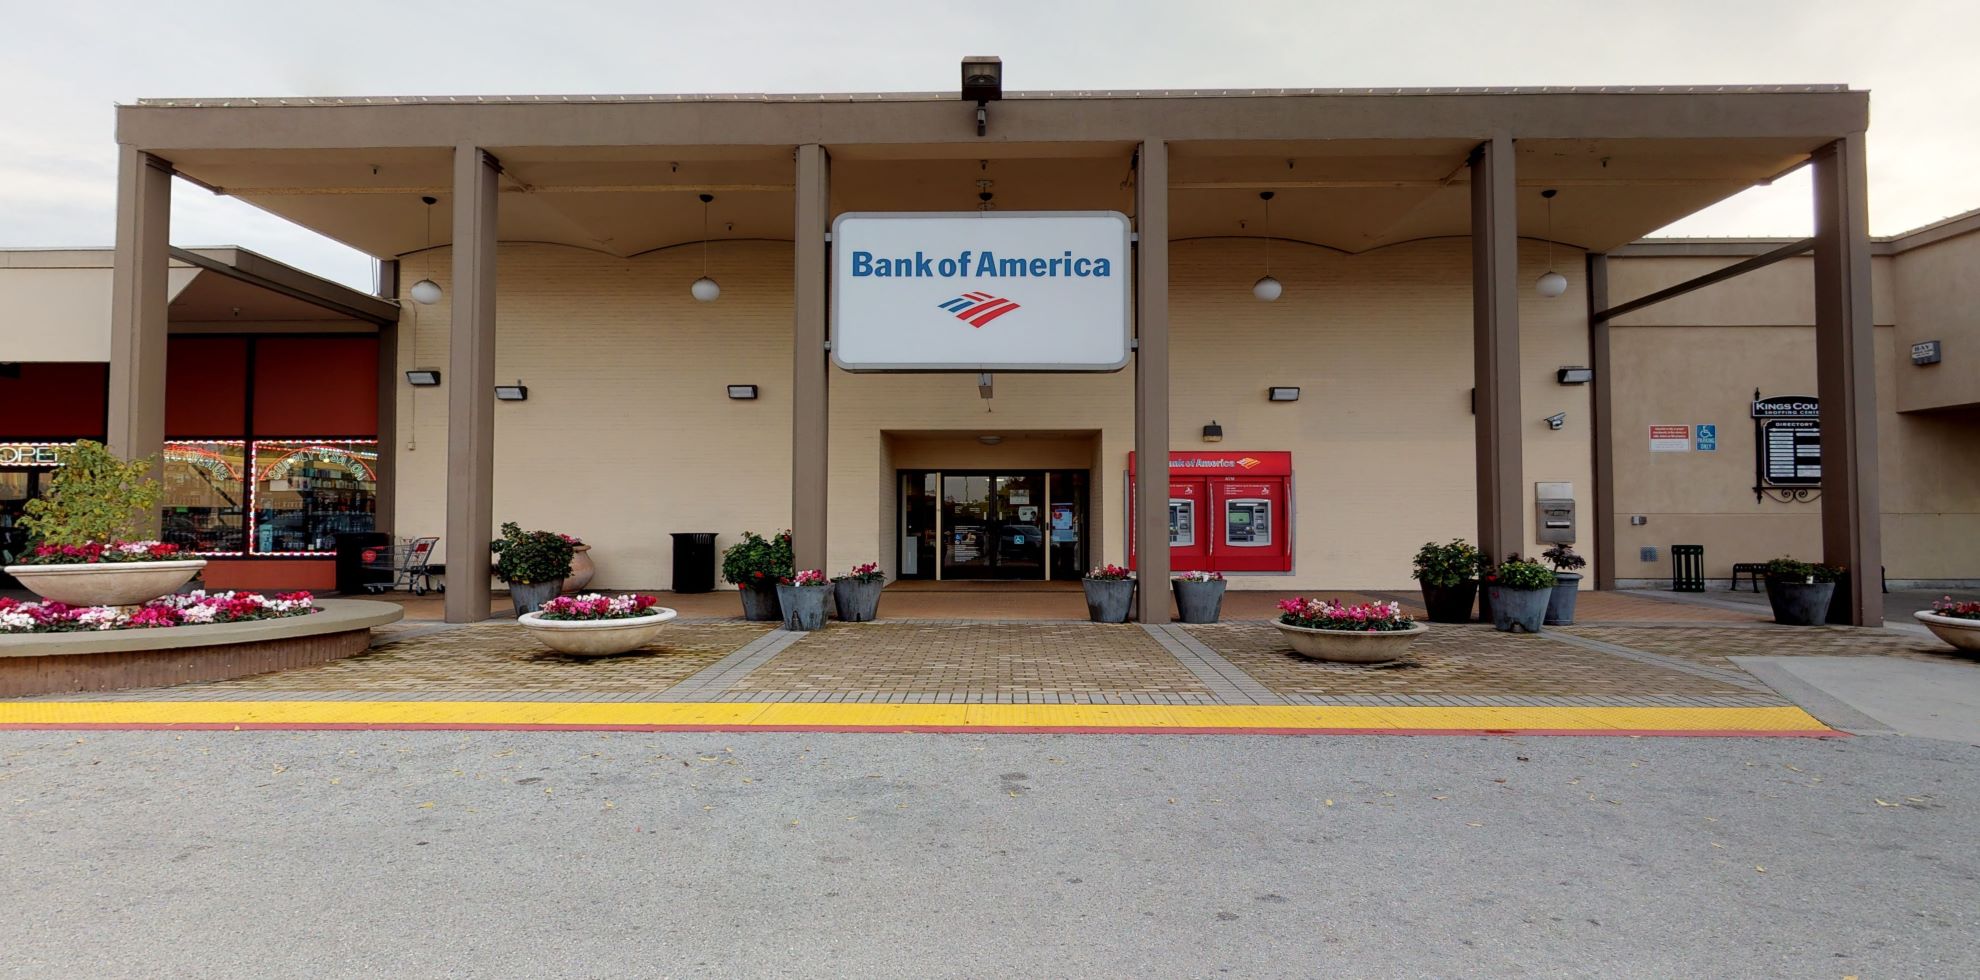 Bank of America financial center with walk-up ATM | 780 Blossom Hill Rd, Los Gatos, CA 95032